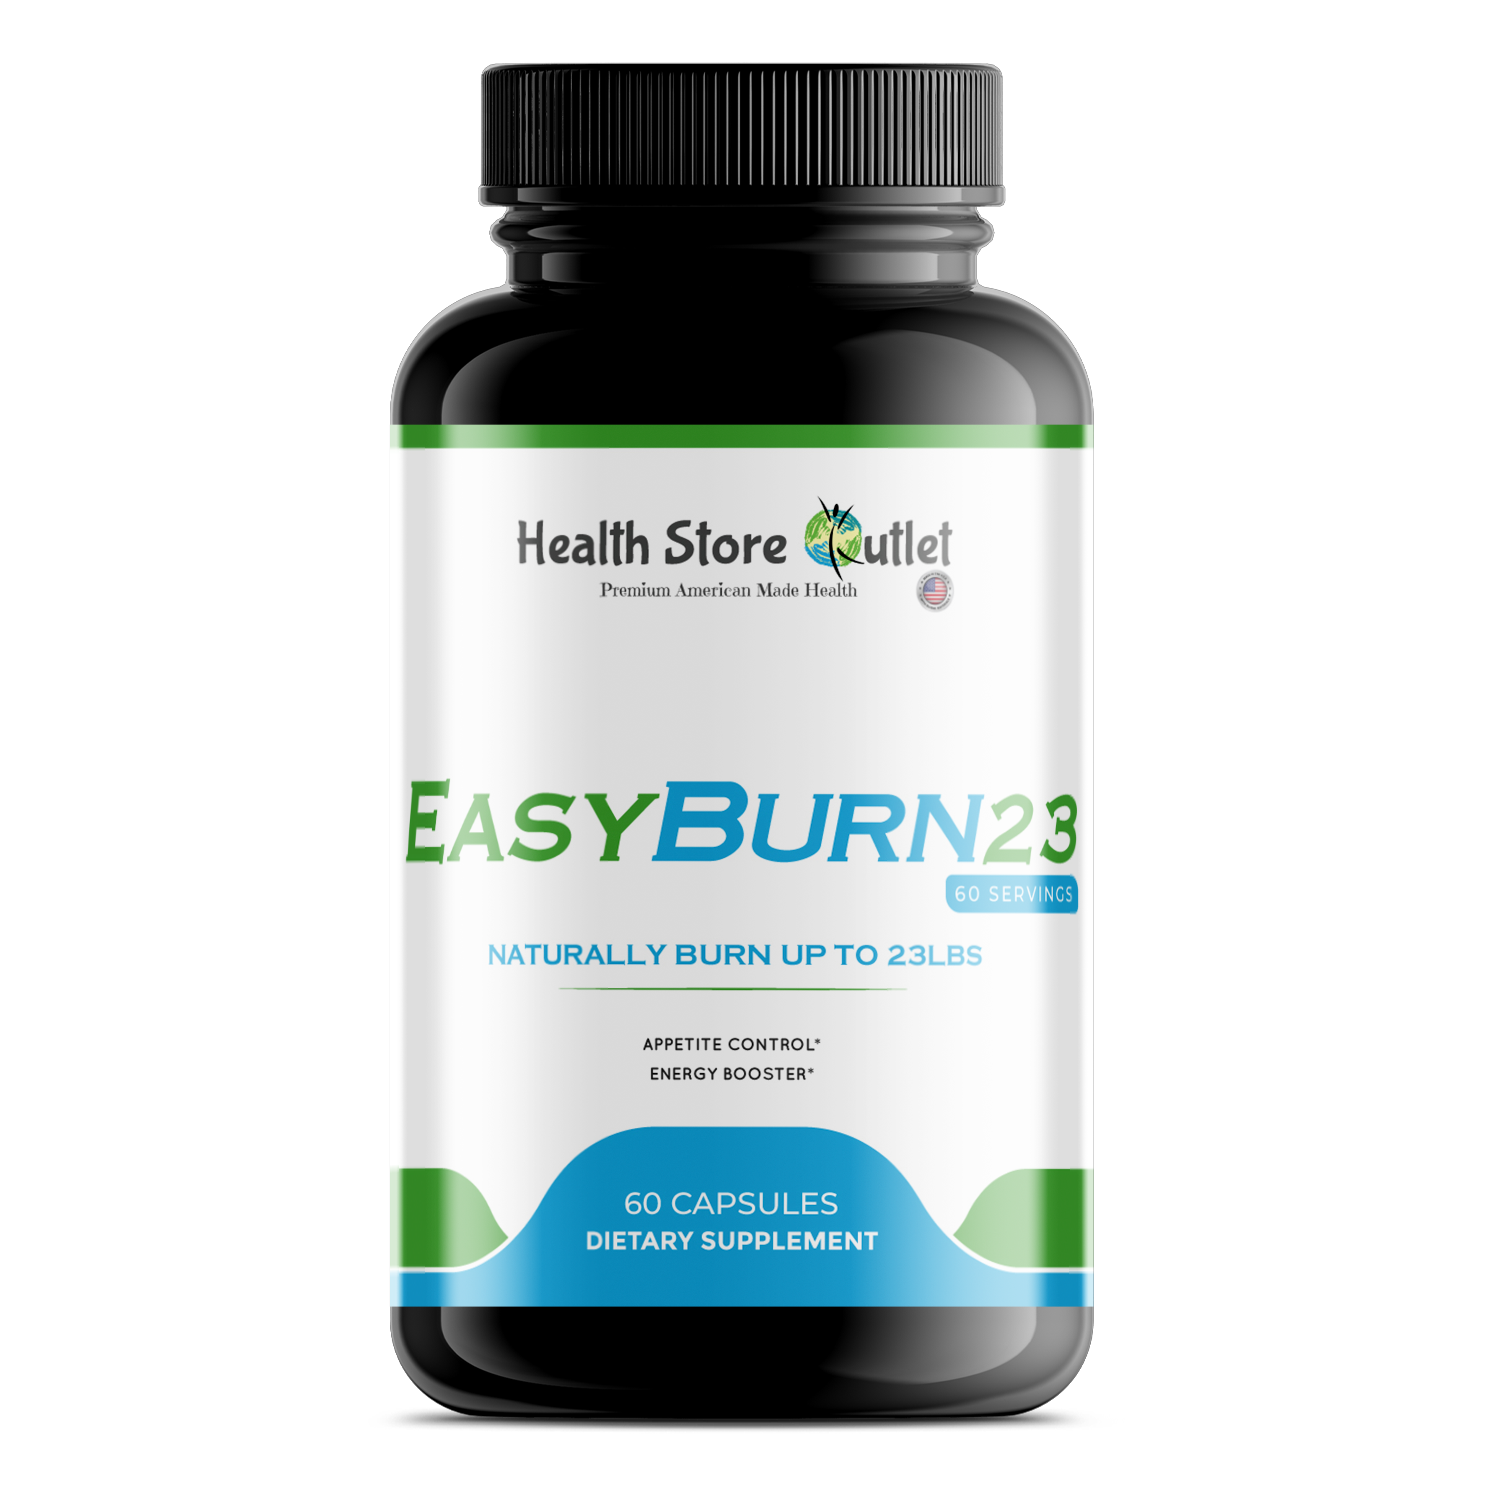 EasyBurn23 (Daily Weight Loss)